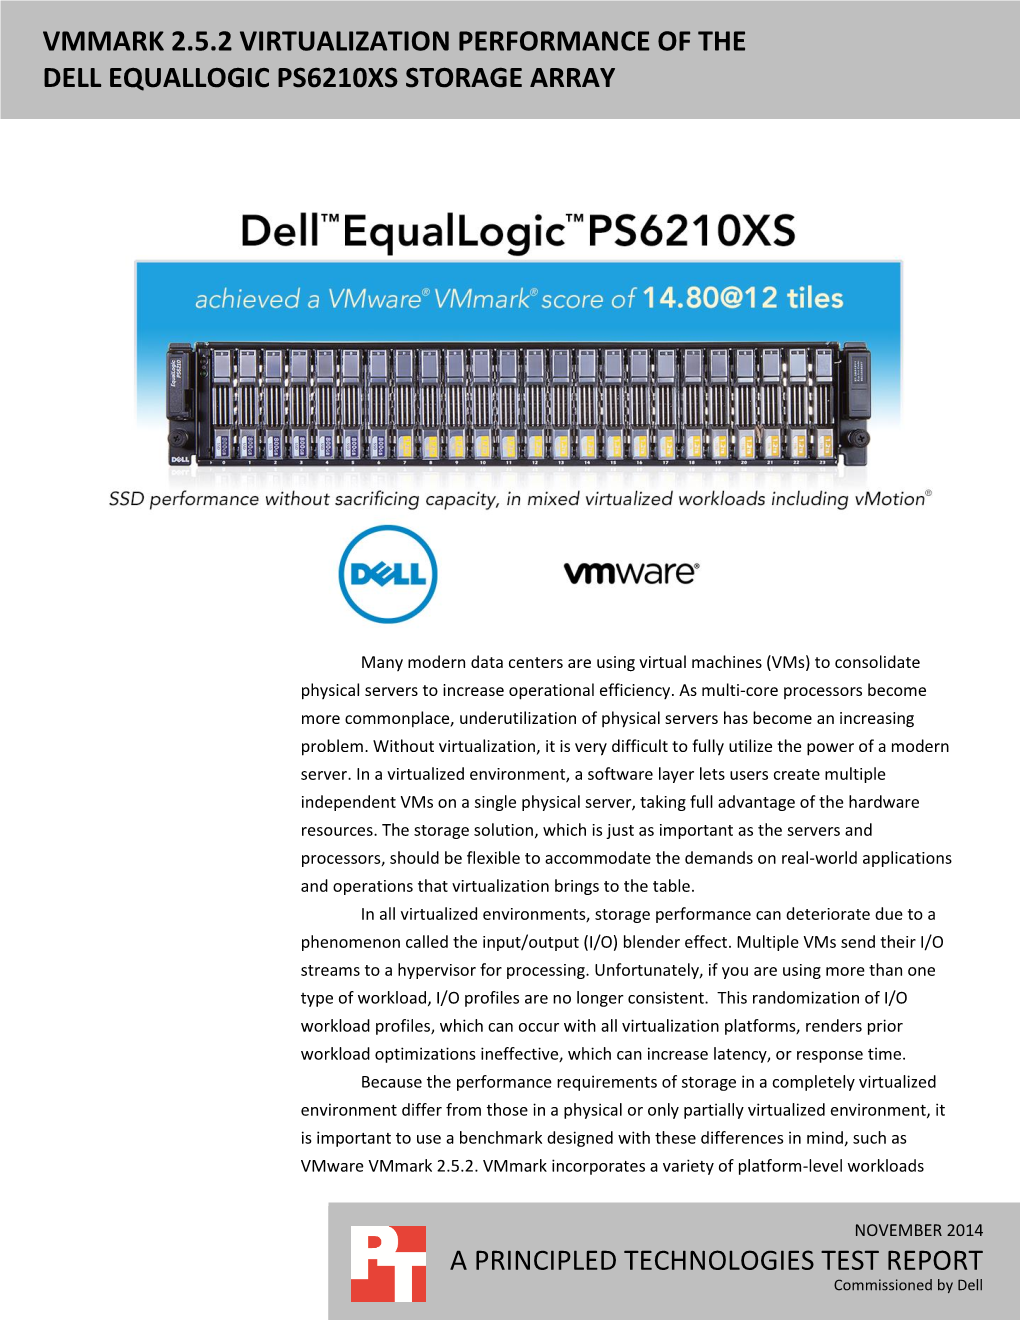 Vmmark 2.5 Virtualization Performance of the Dell Equallogic PS6210XS Storage Array